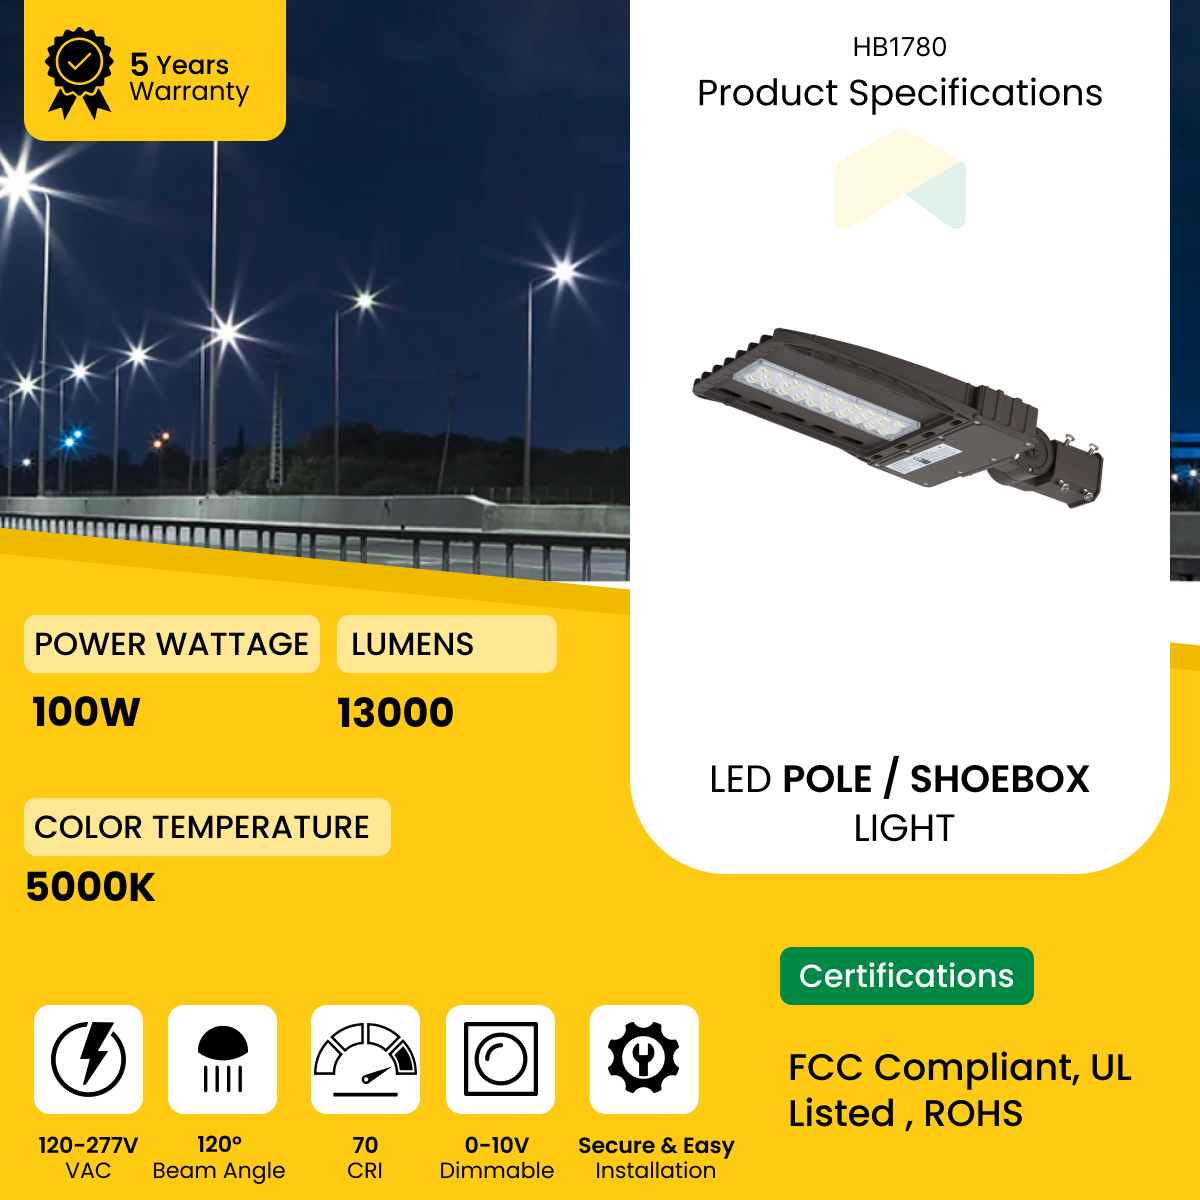 LED Shoebox Light with 100W  for Outdoor Street Area Lighting, 5000K, 13000Lumens  Direct Mount - AC120-277V - 0-10V Dimmable - IP66 - UL Listed - DLC Premium Listed - 5 Years Warranty